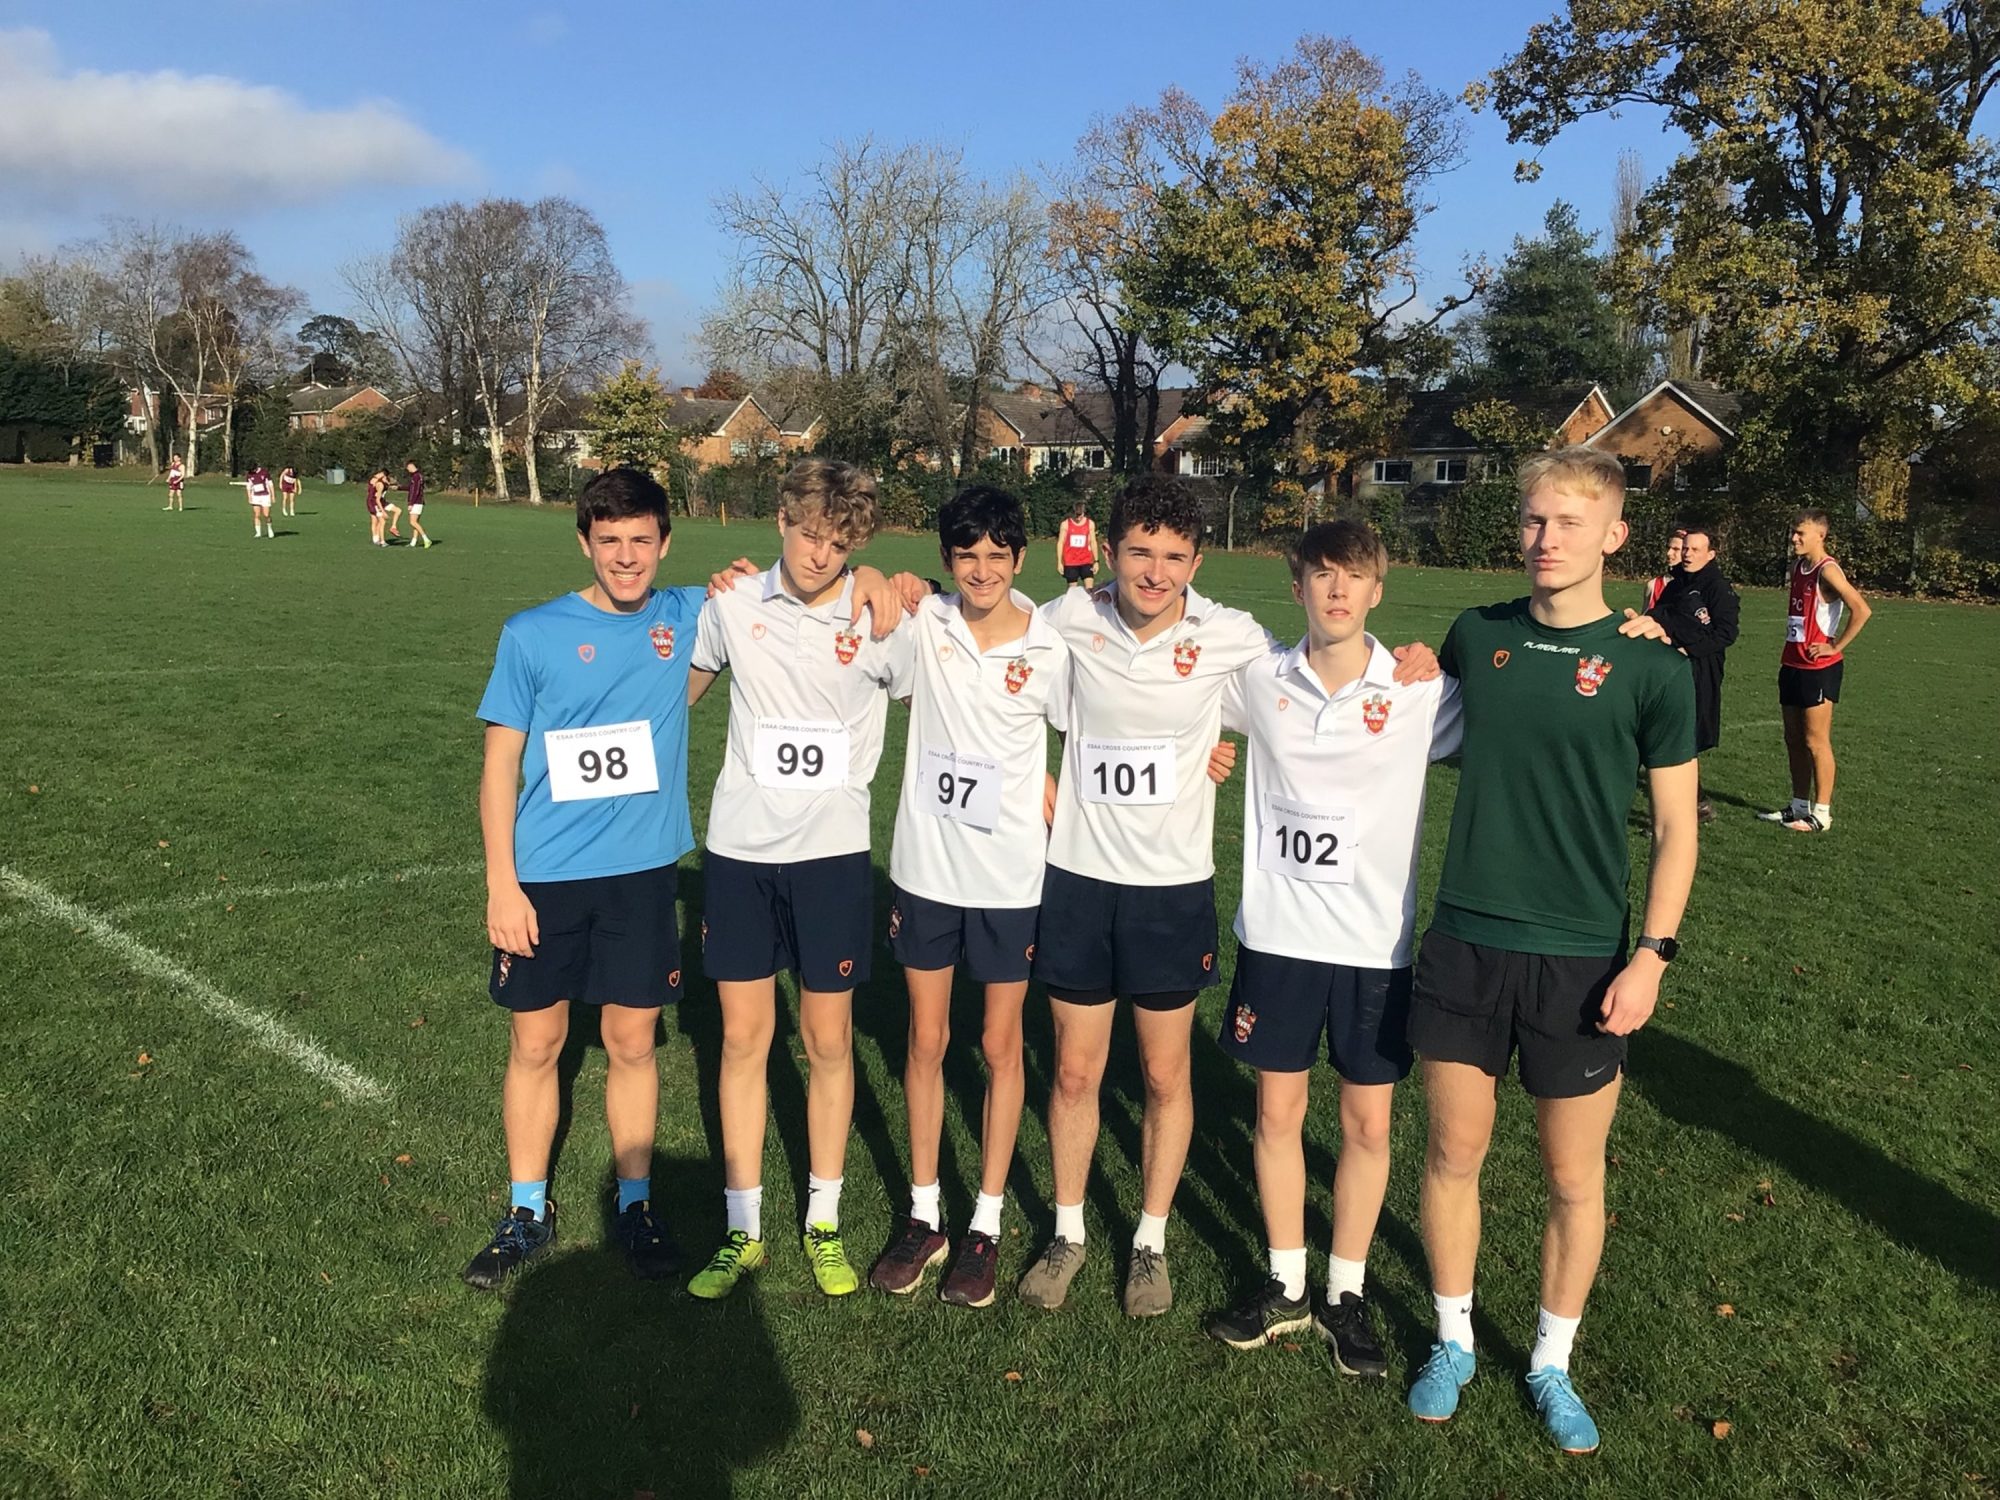 Cross-Country Cup Runners Qualify for National Finals